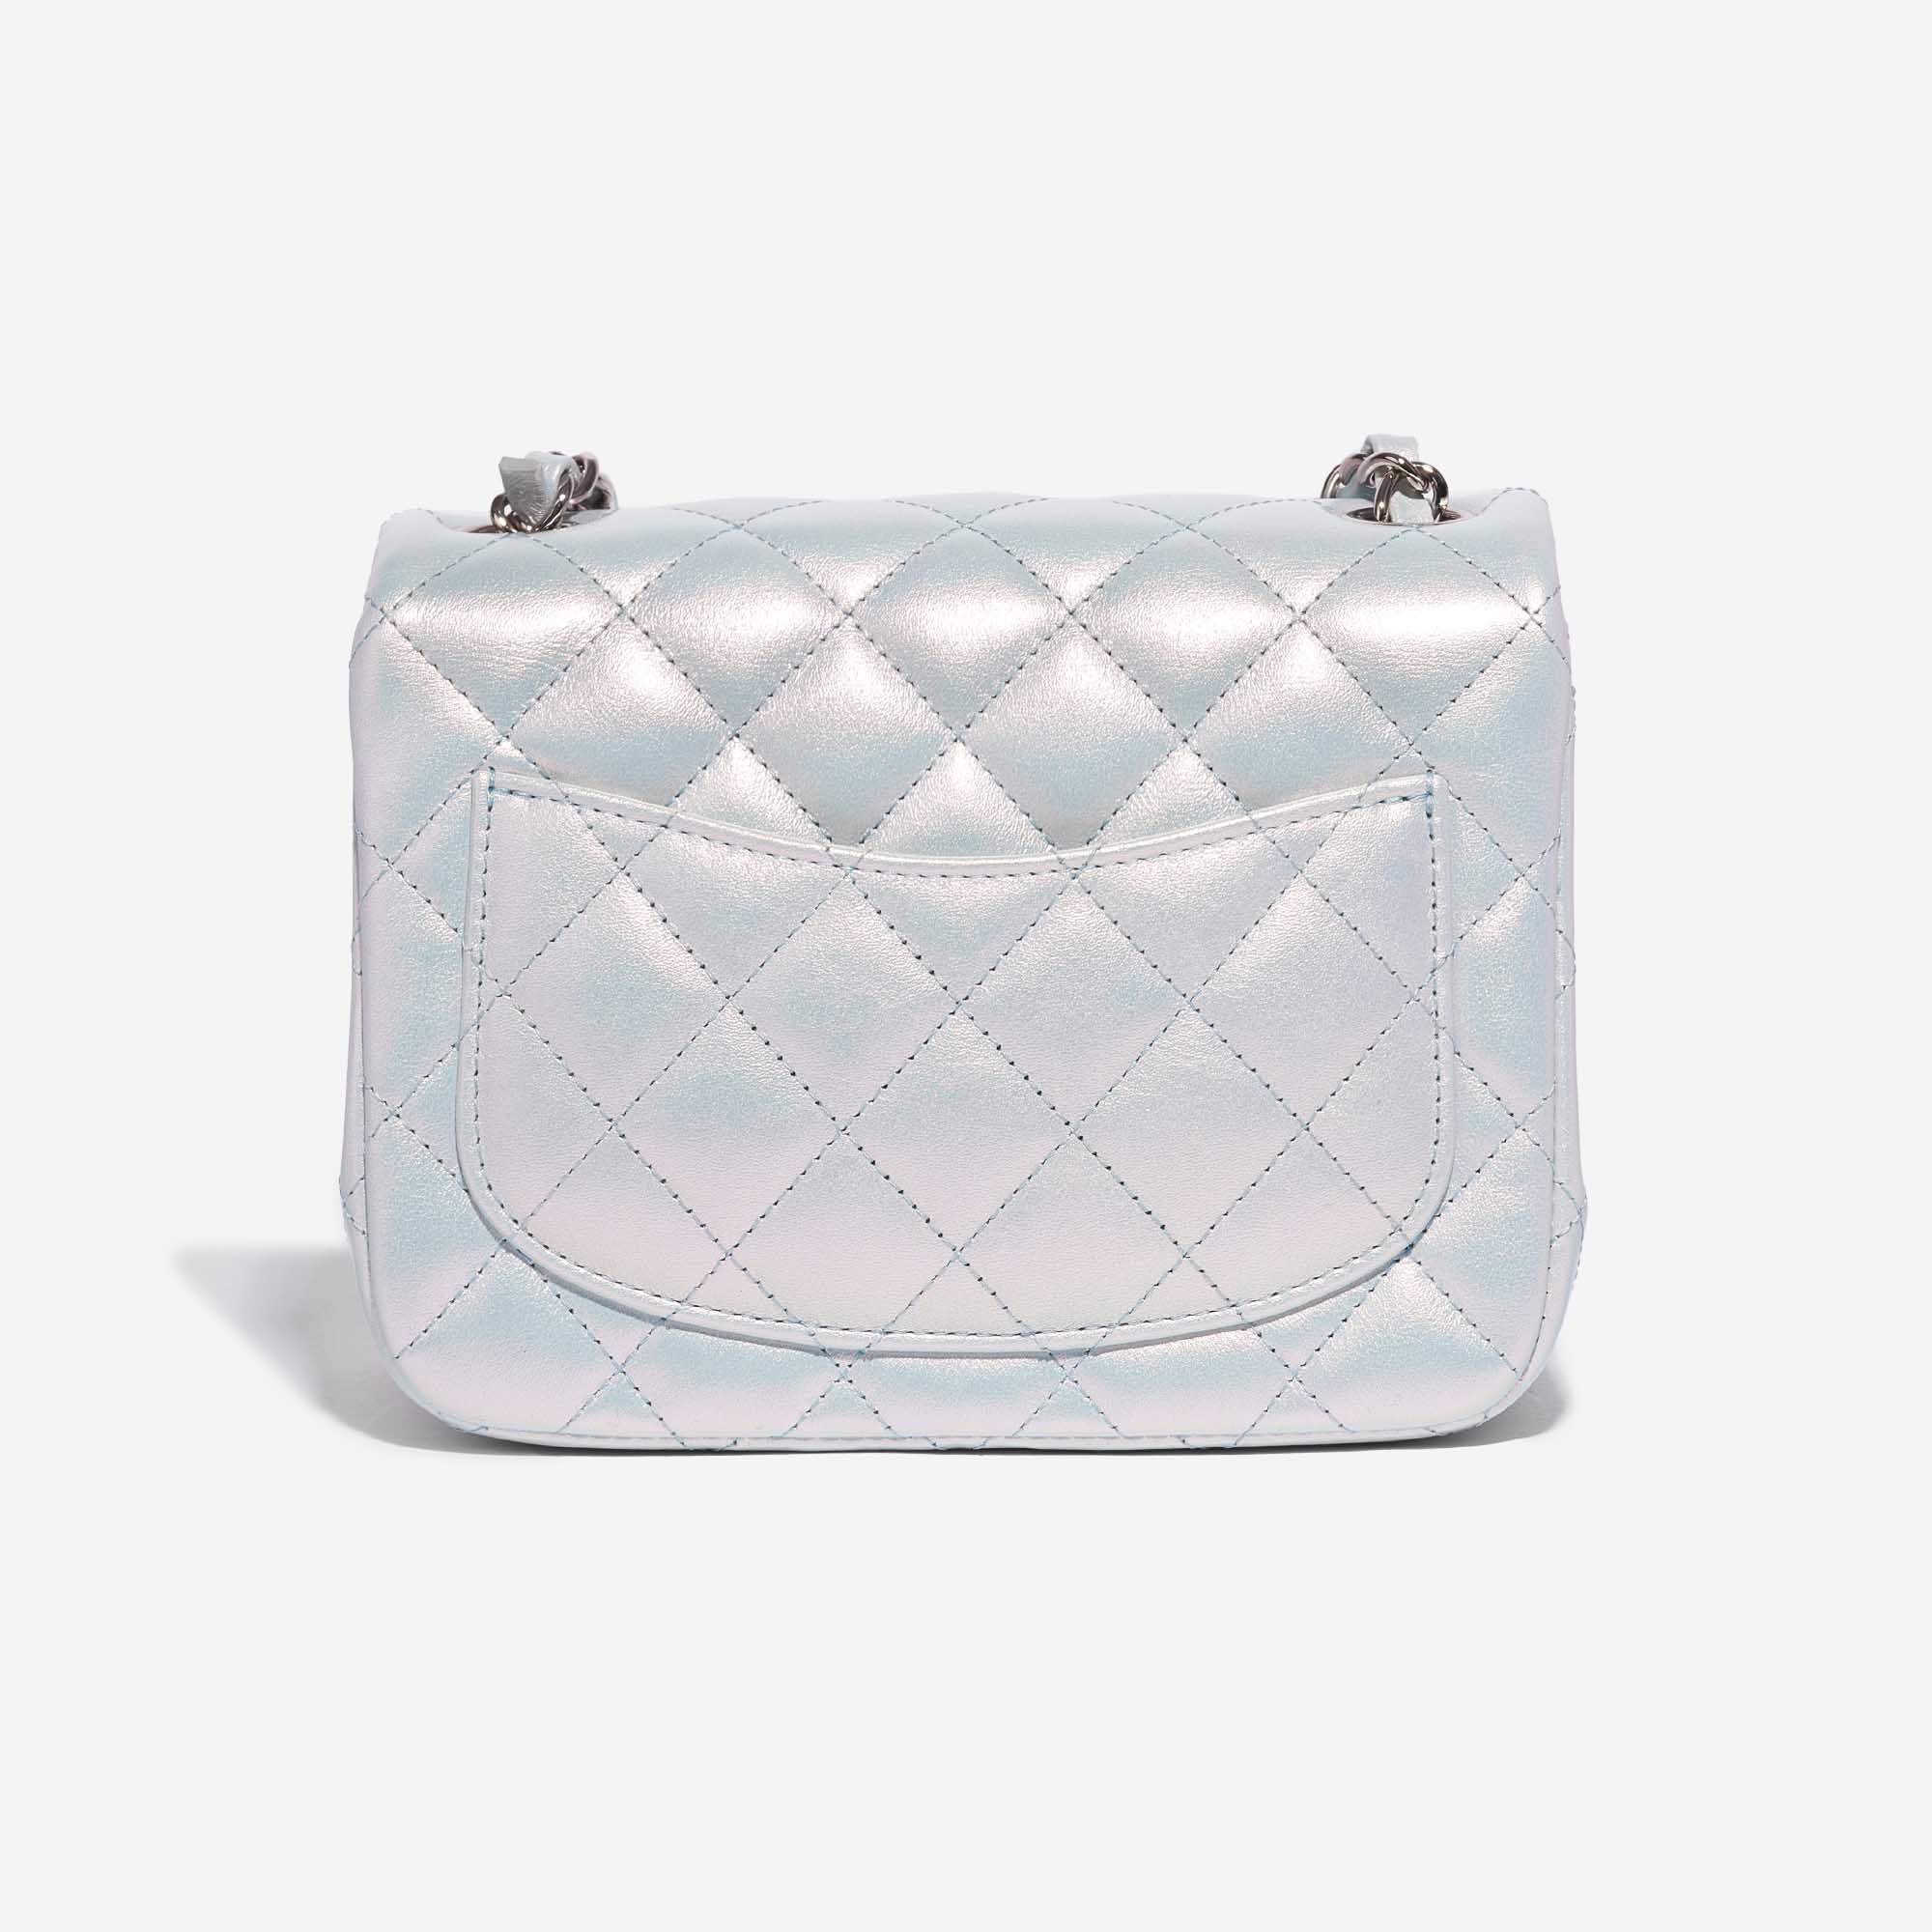 Pre-owned Chanel bag Timeless Square Mini Lamb Blue Iridescent Blue Back | Sell your designer bag on Saclab.com